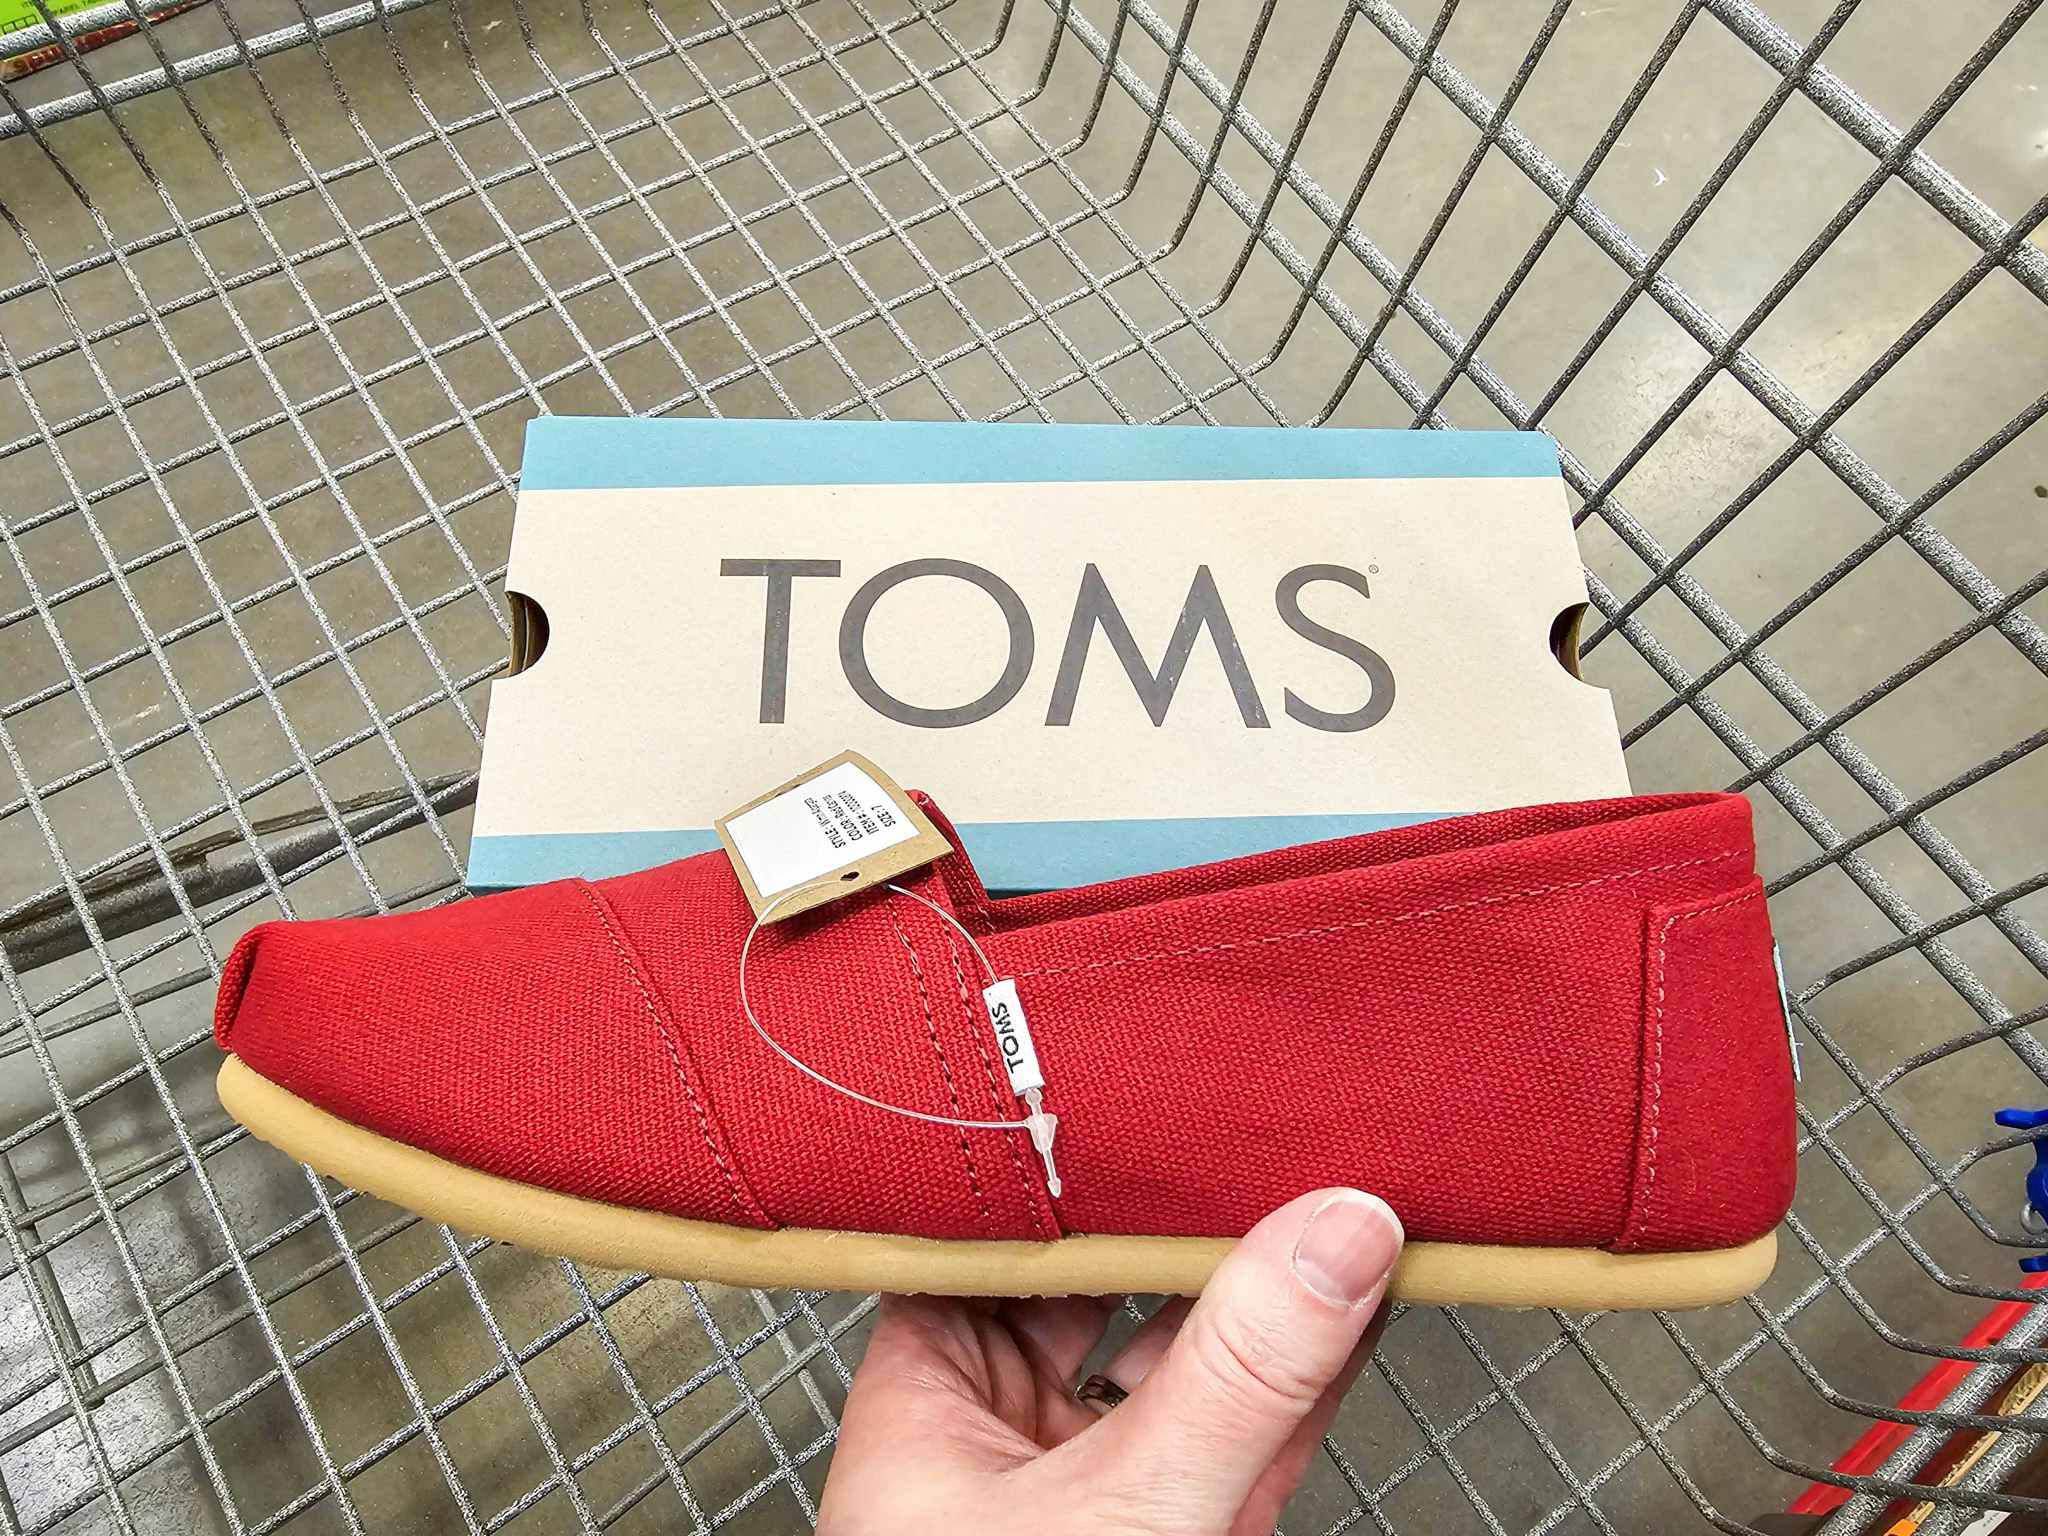 person holding a red toms shoe over a shoe box in a cart